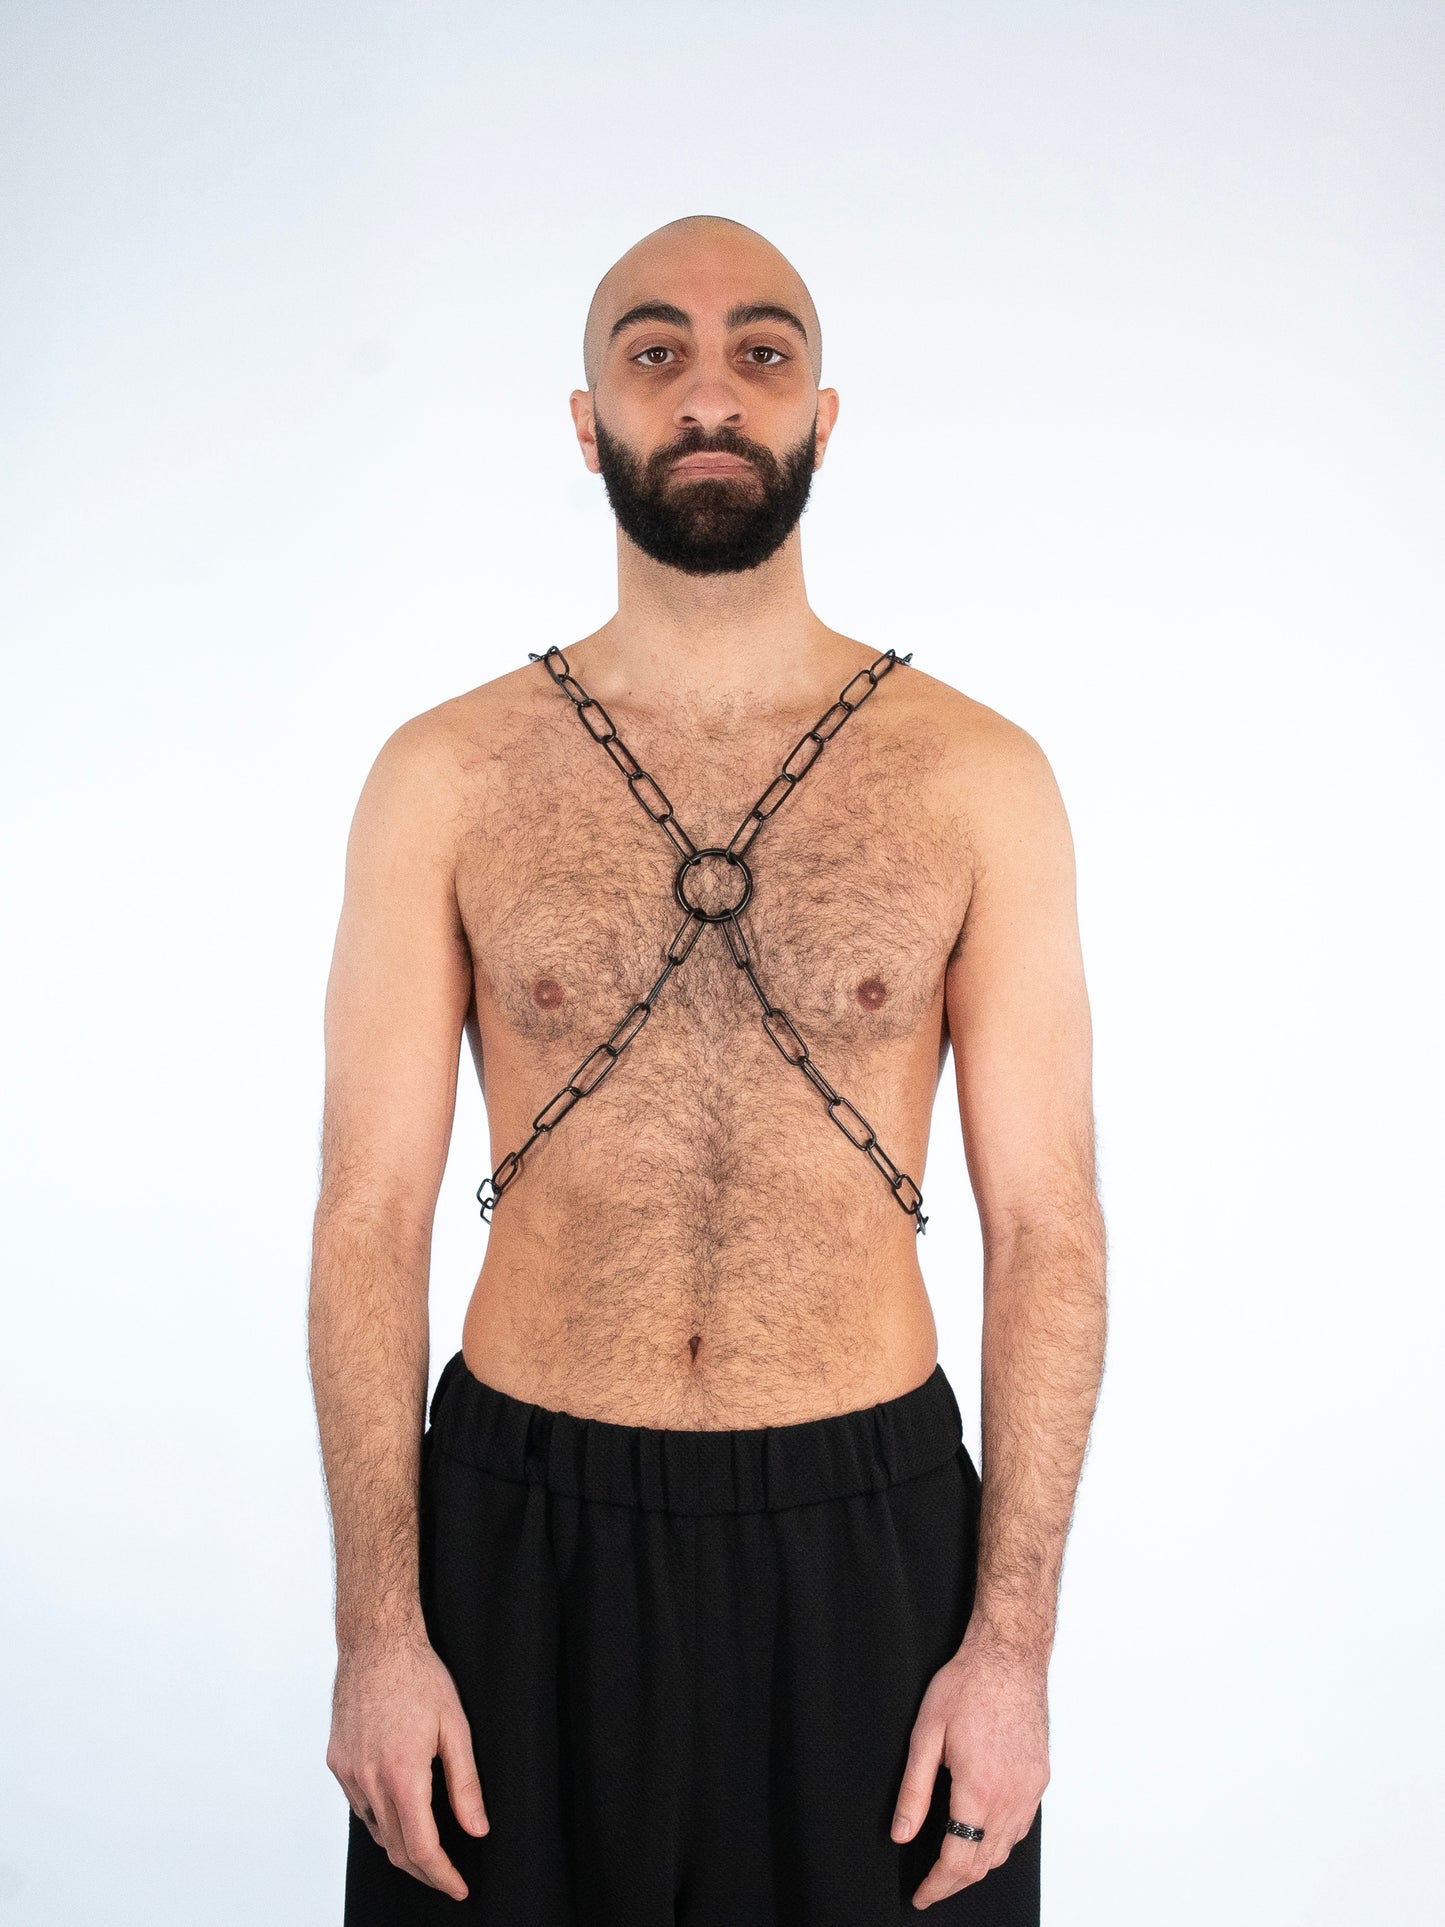 Front view of a man with beard wearing a black chain harness.